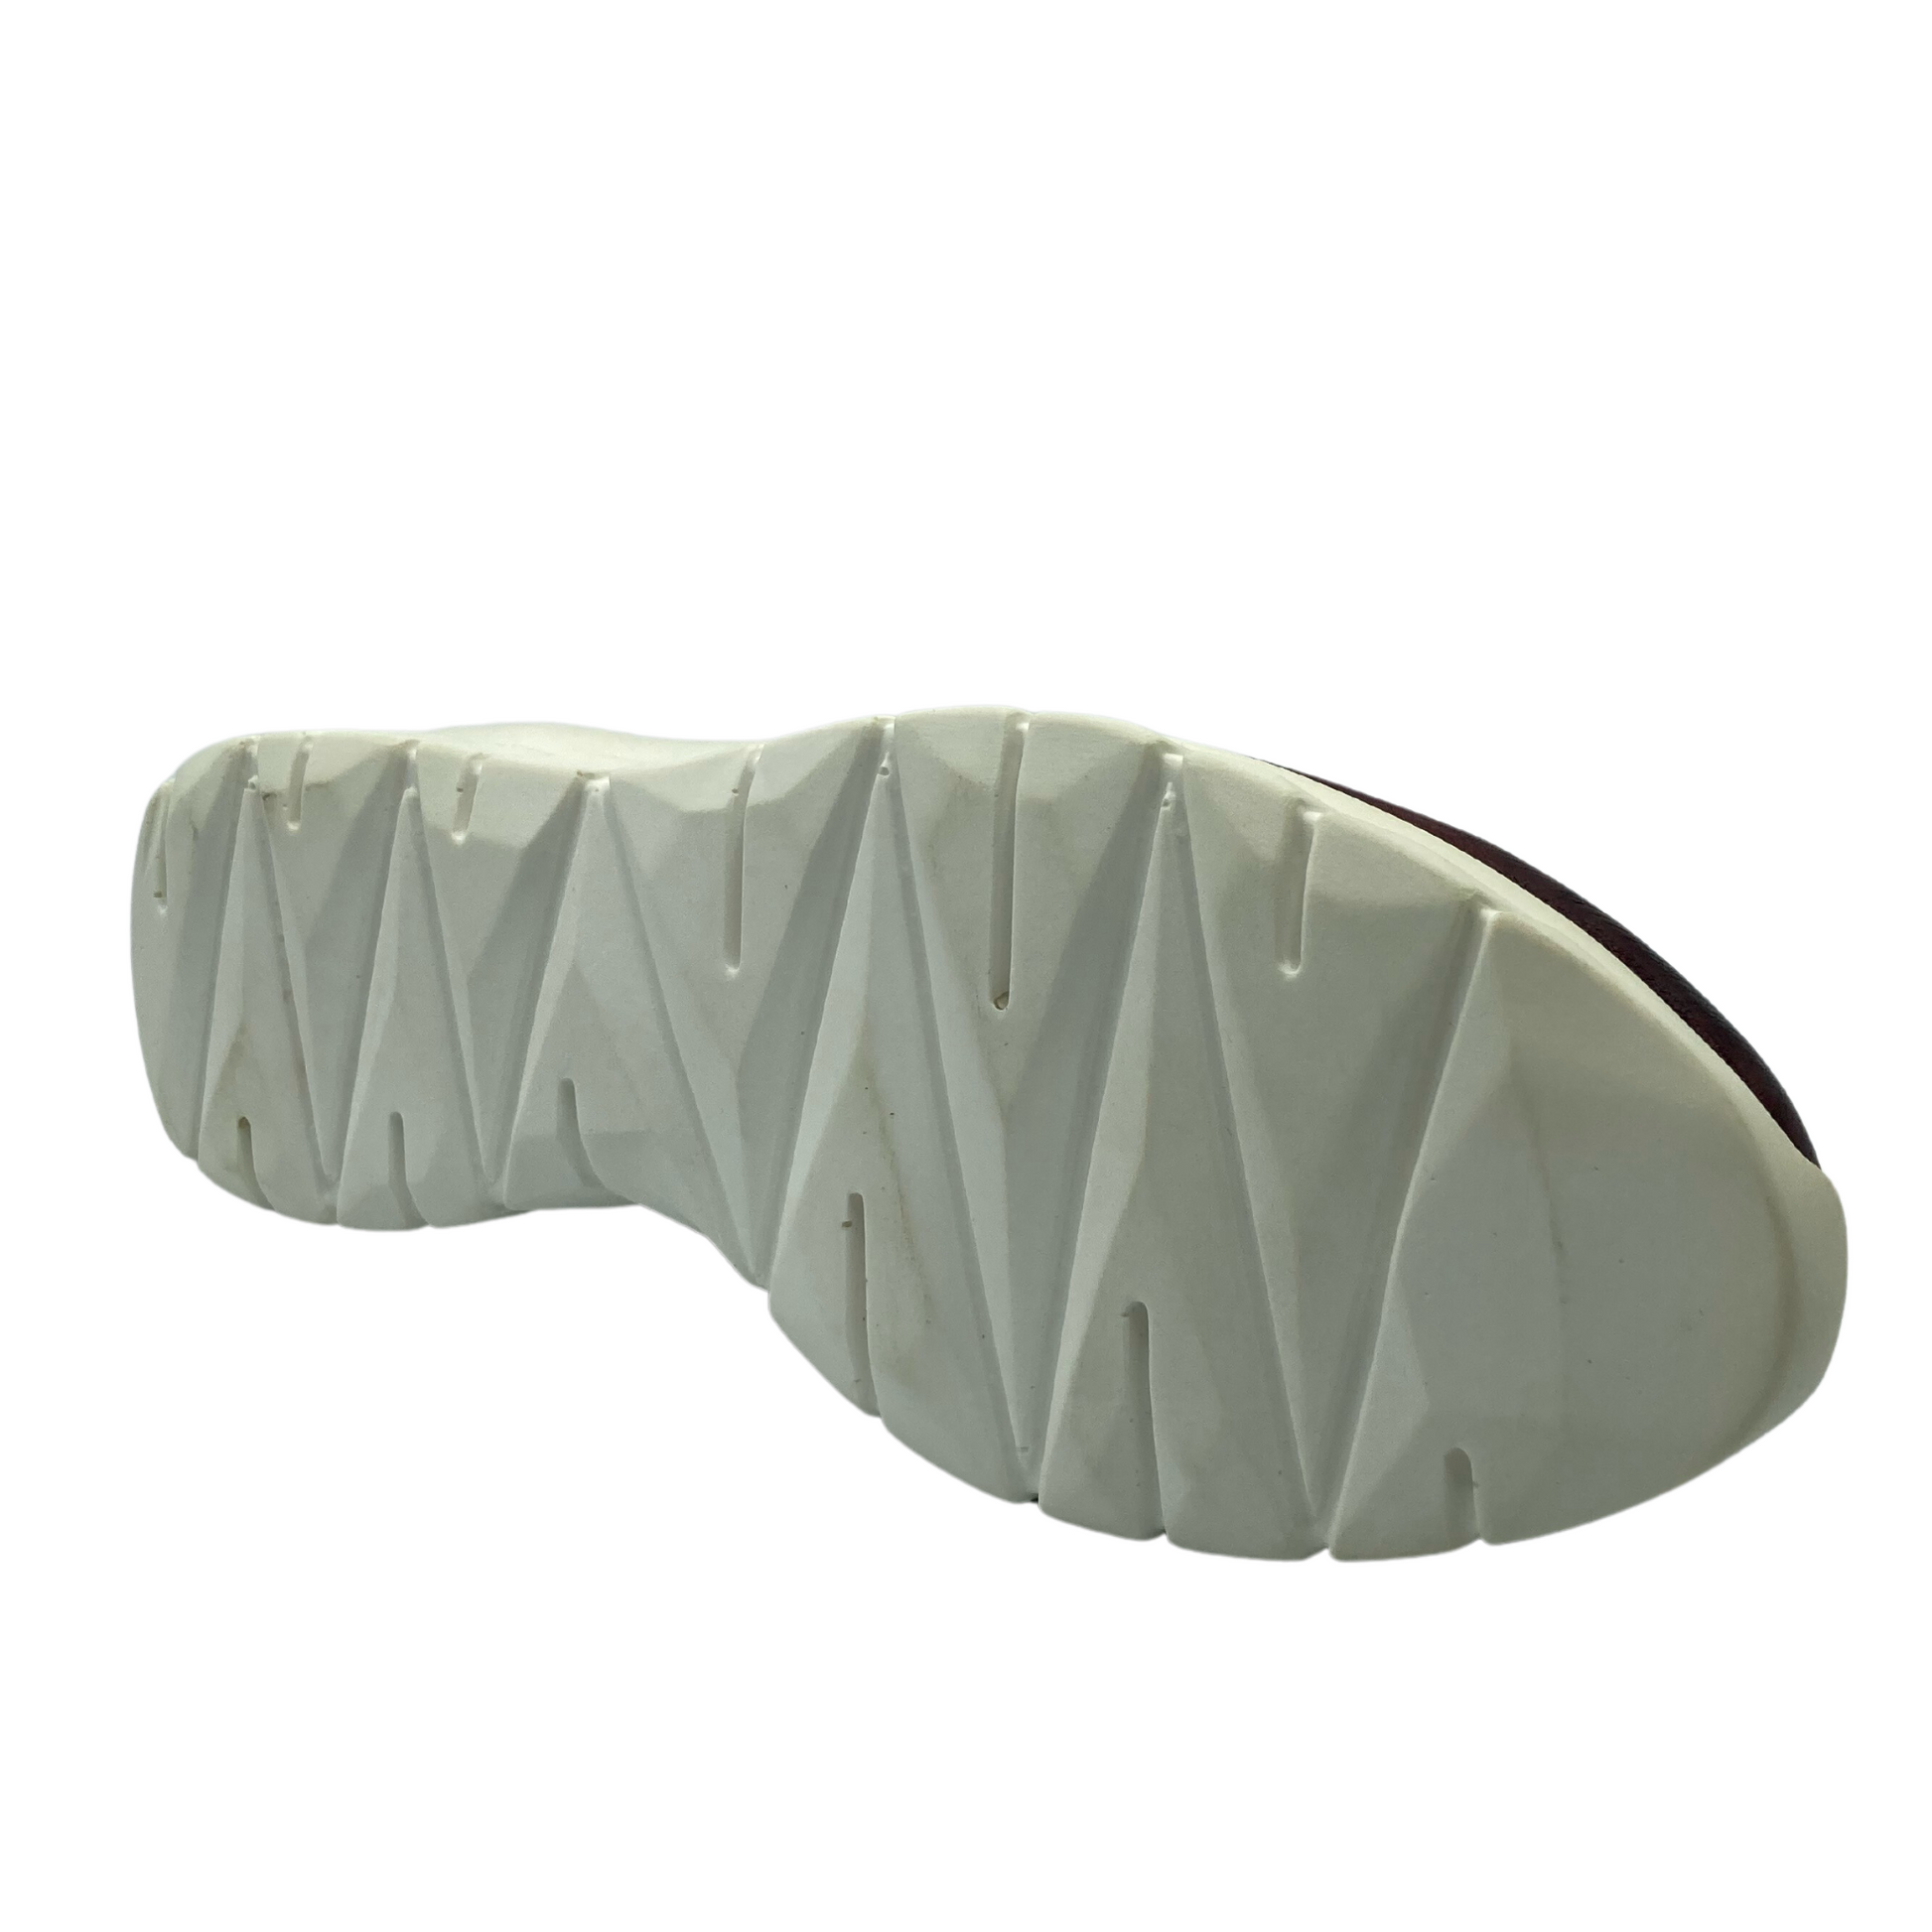 Bottom view of white, slip-resistant, sole of leather shoe